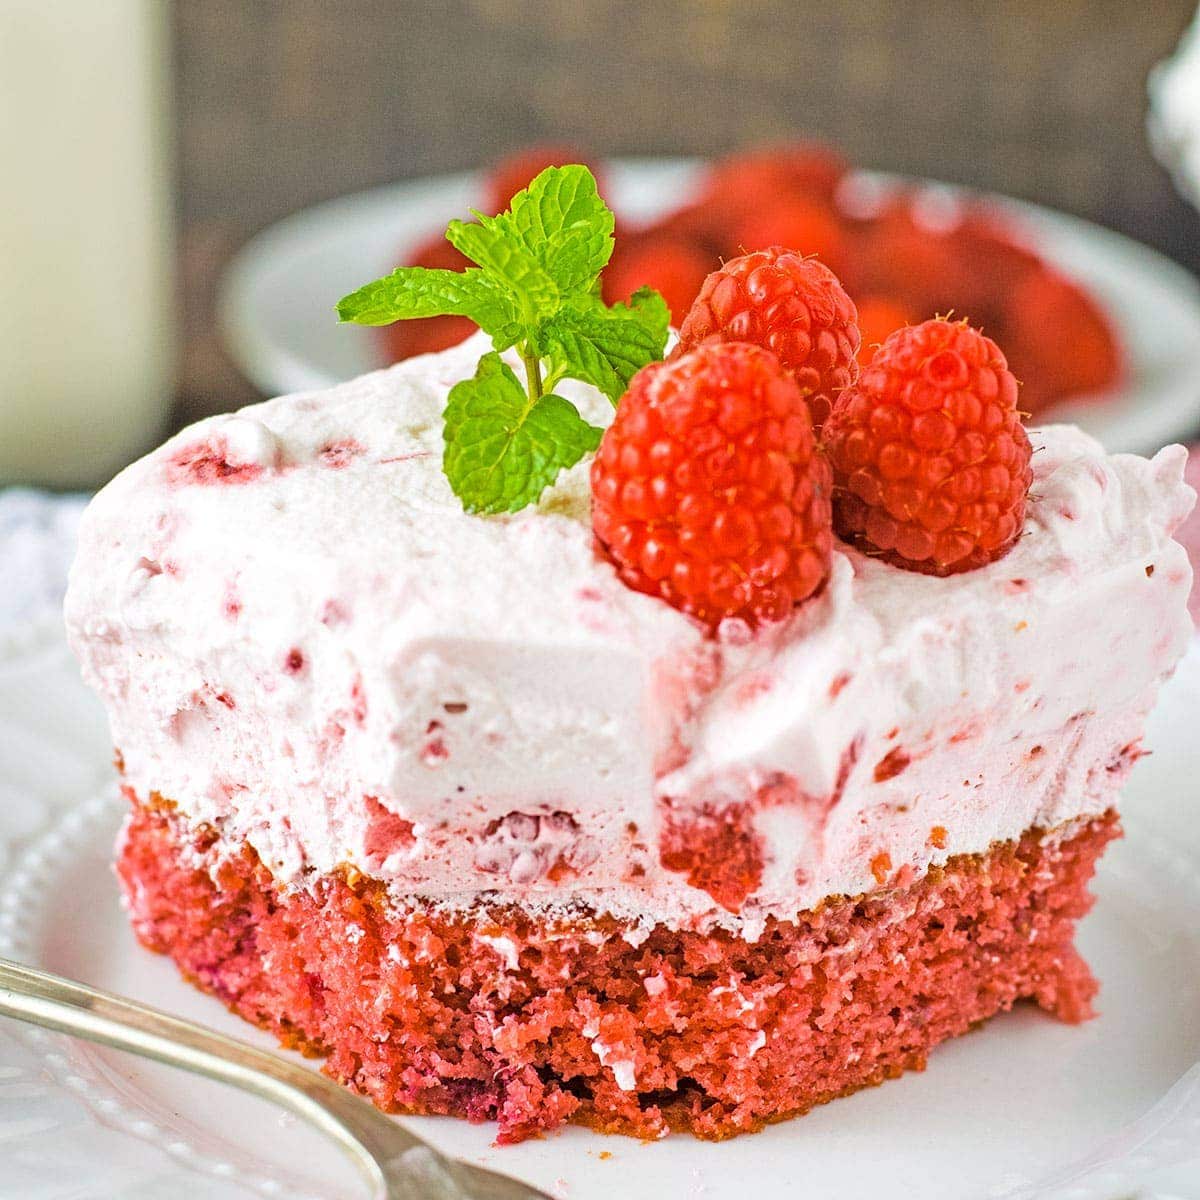 A slice of raspberry fluff cake topped with raspberries and mint leaves.